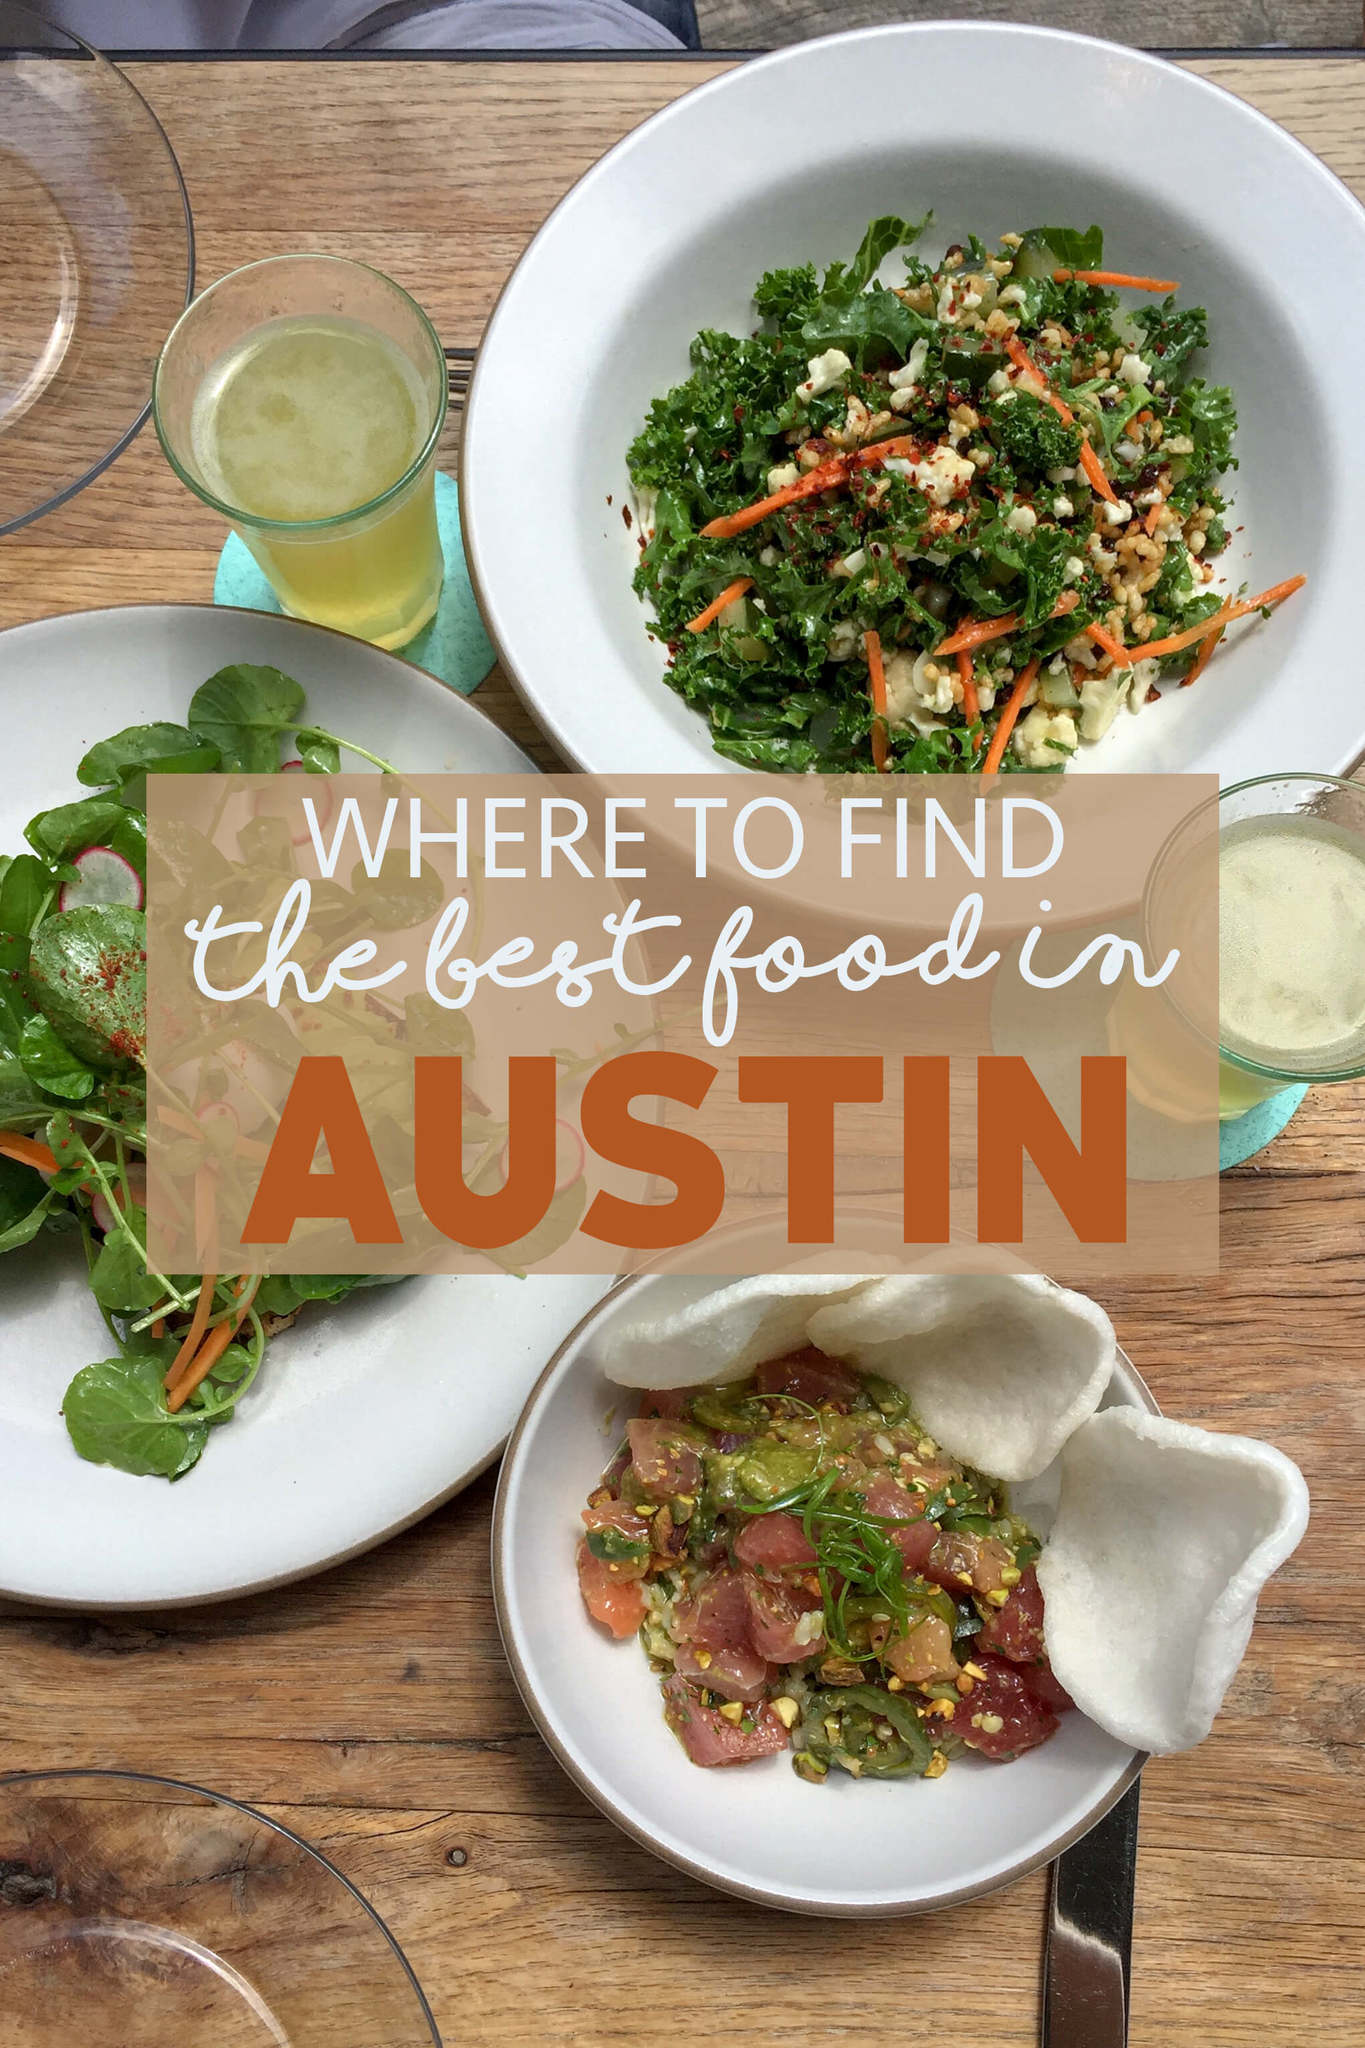 Where-to-find-the-best-food-in-austin